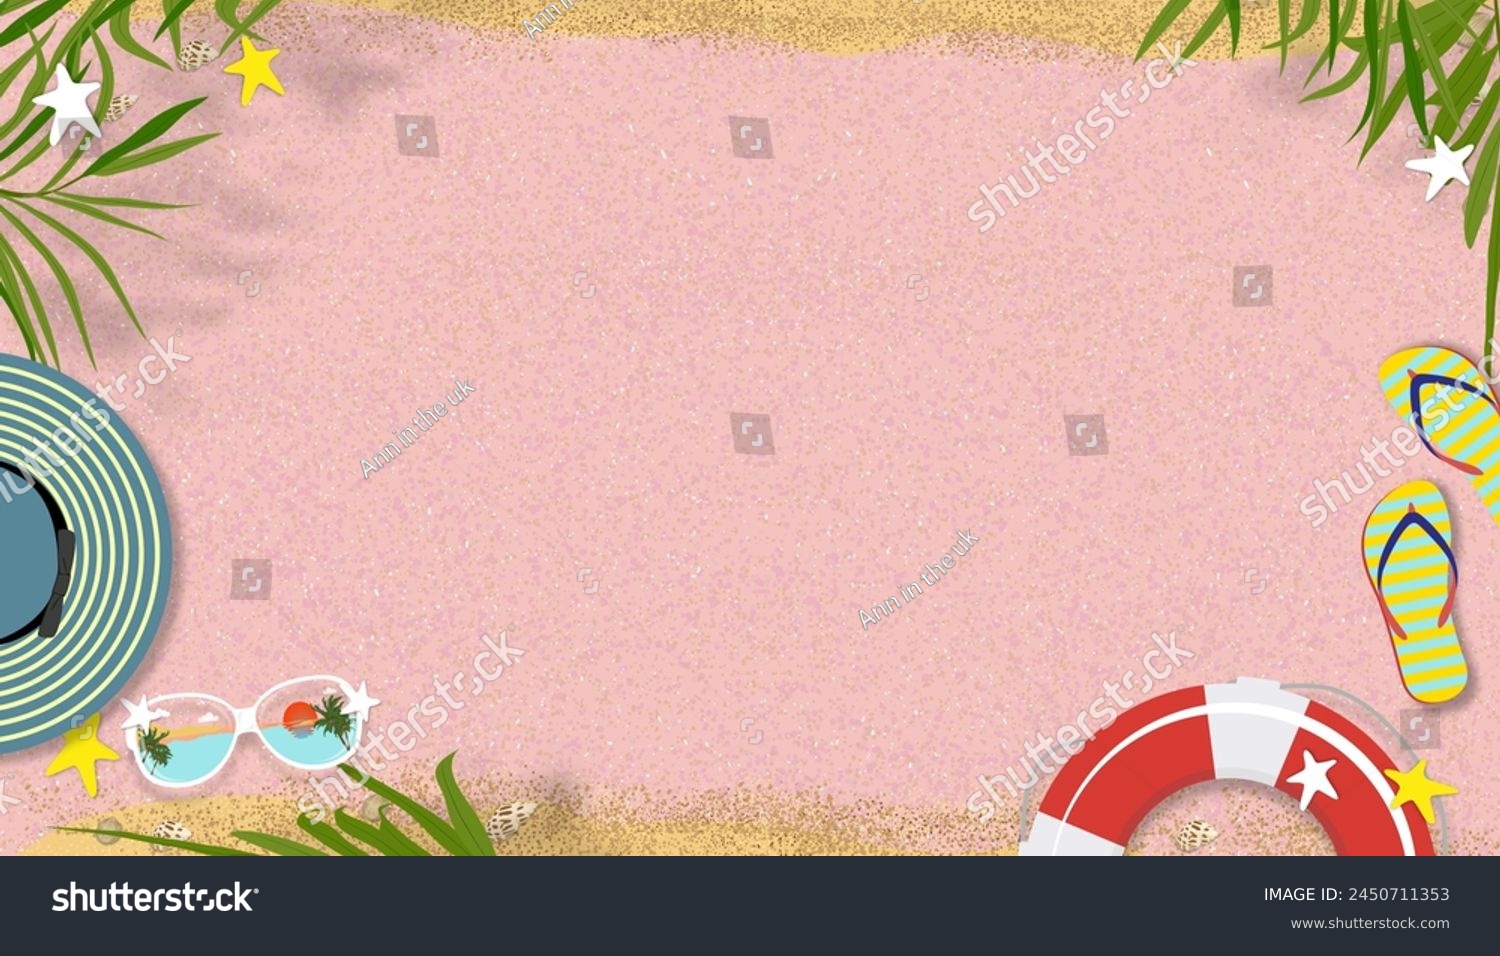 Summer background,Beach vacation holiday with coconut palm leaves border,Hat,Sunglasses,flip flops on pink sand texture,Vector banner flat lay tropical Summer design for Sale,Parties  #2450711353